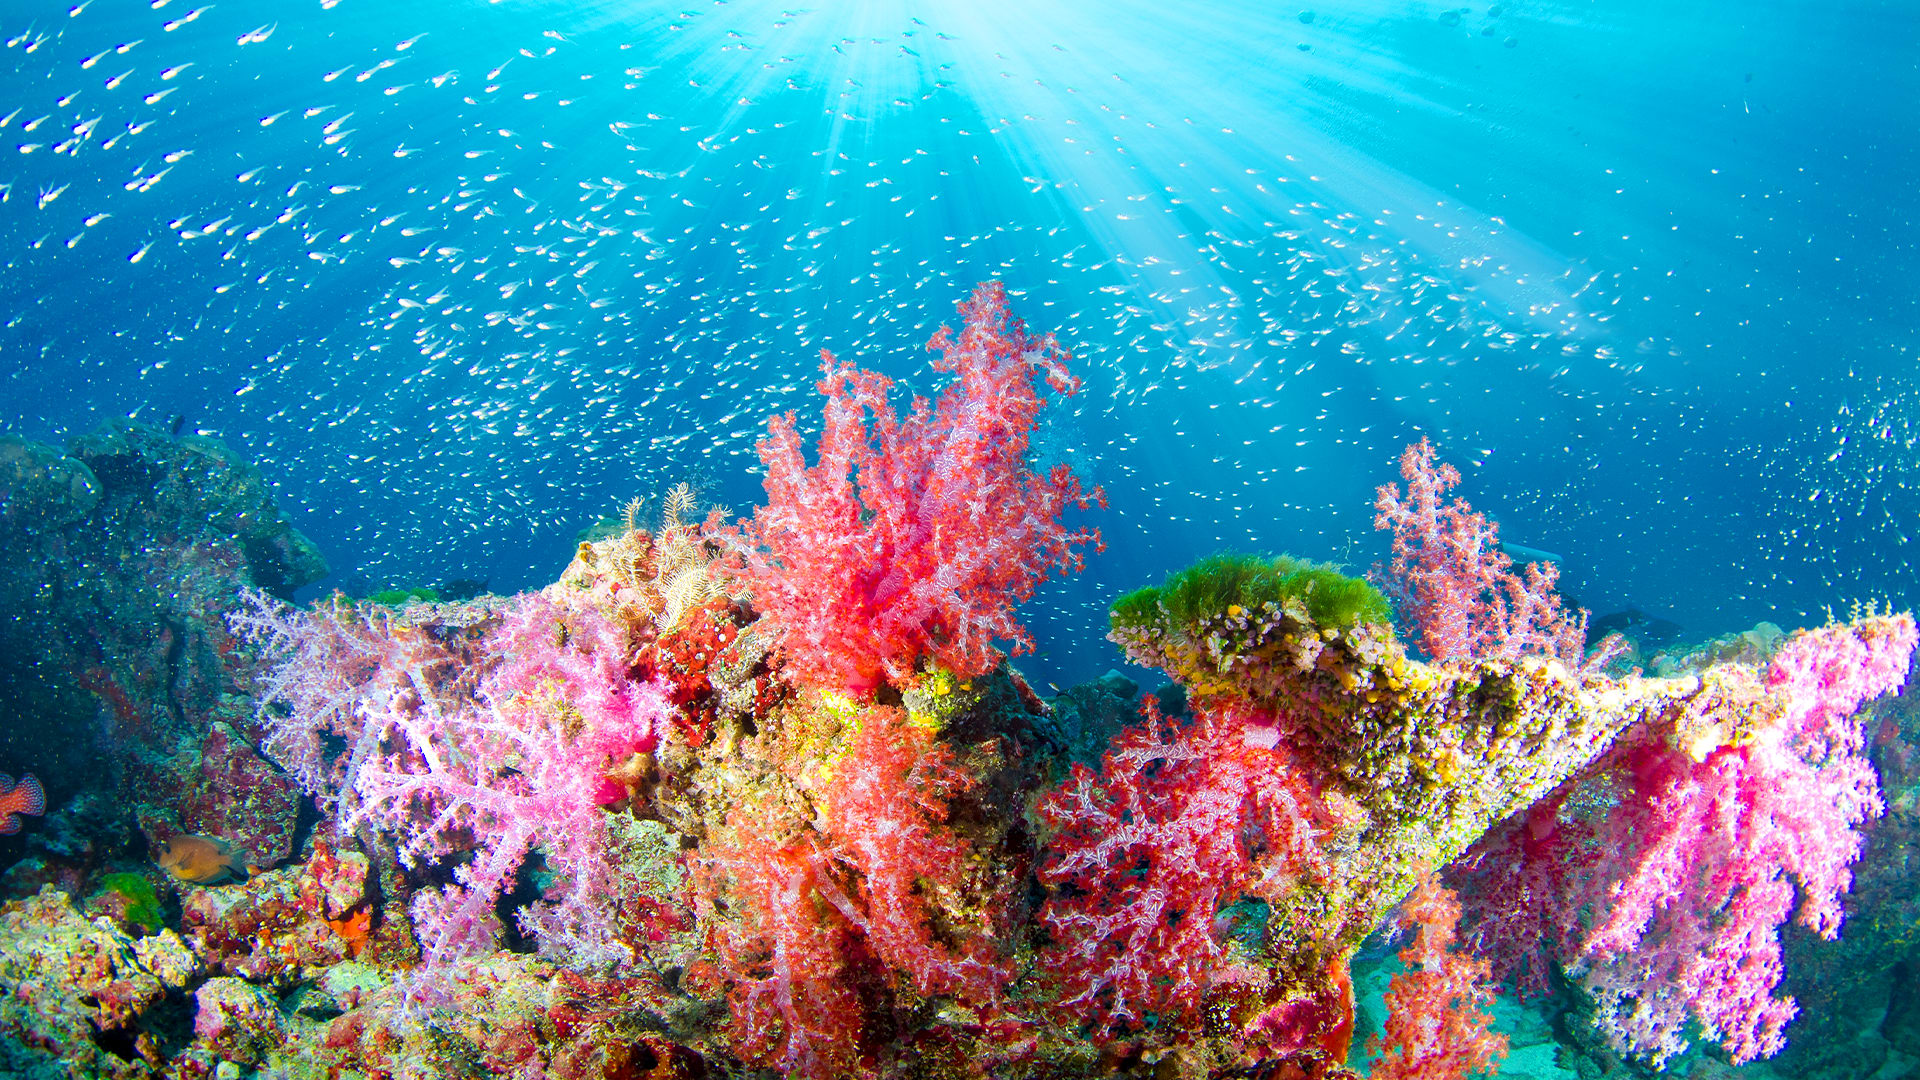 Why are coral reefs so colorful?